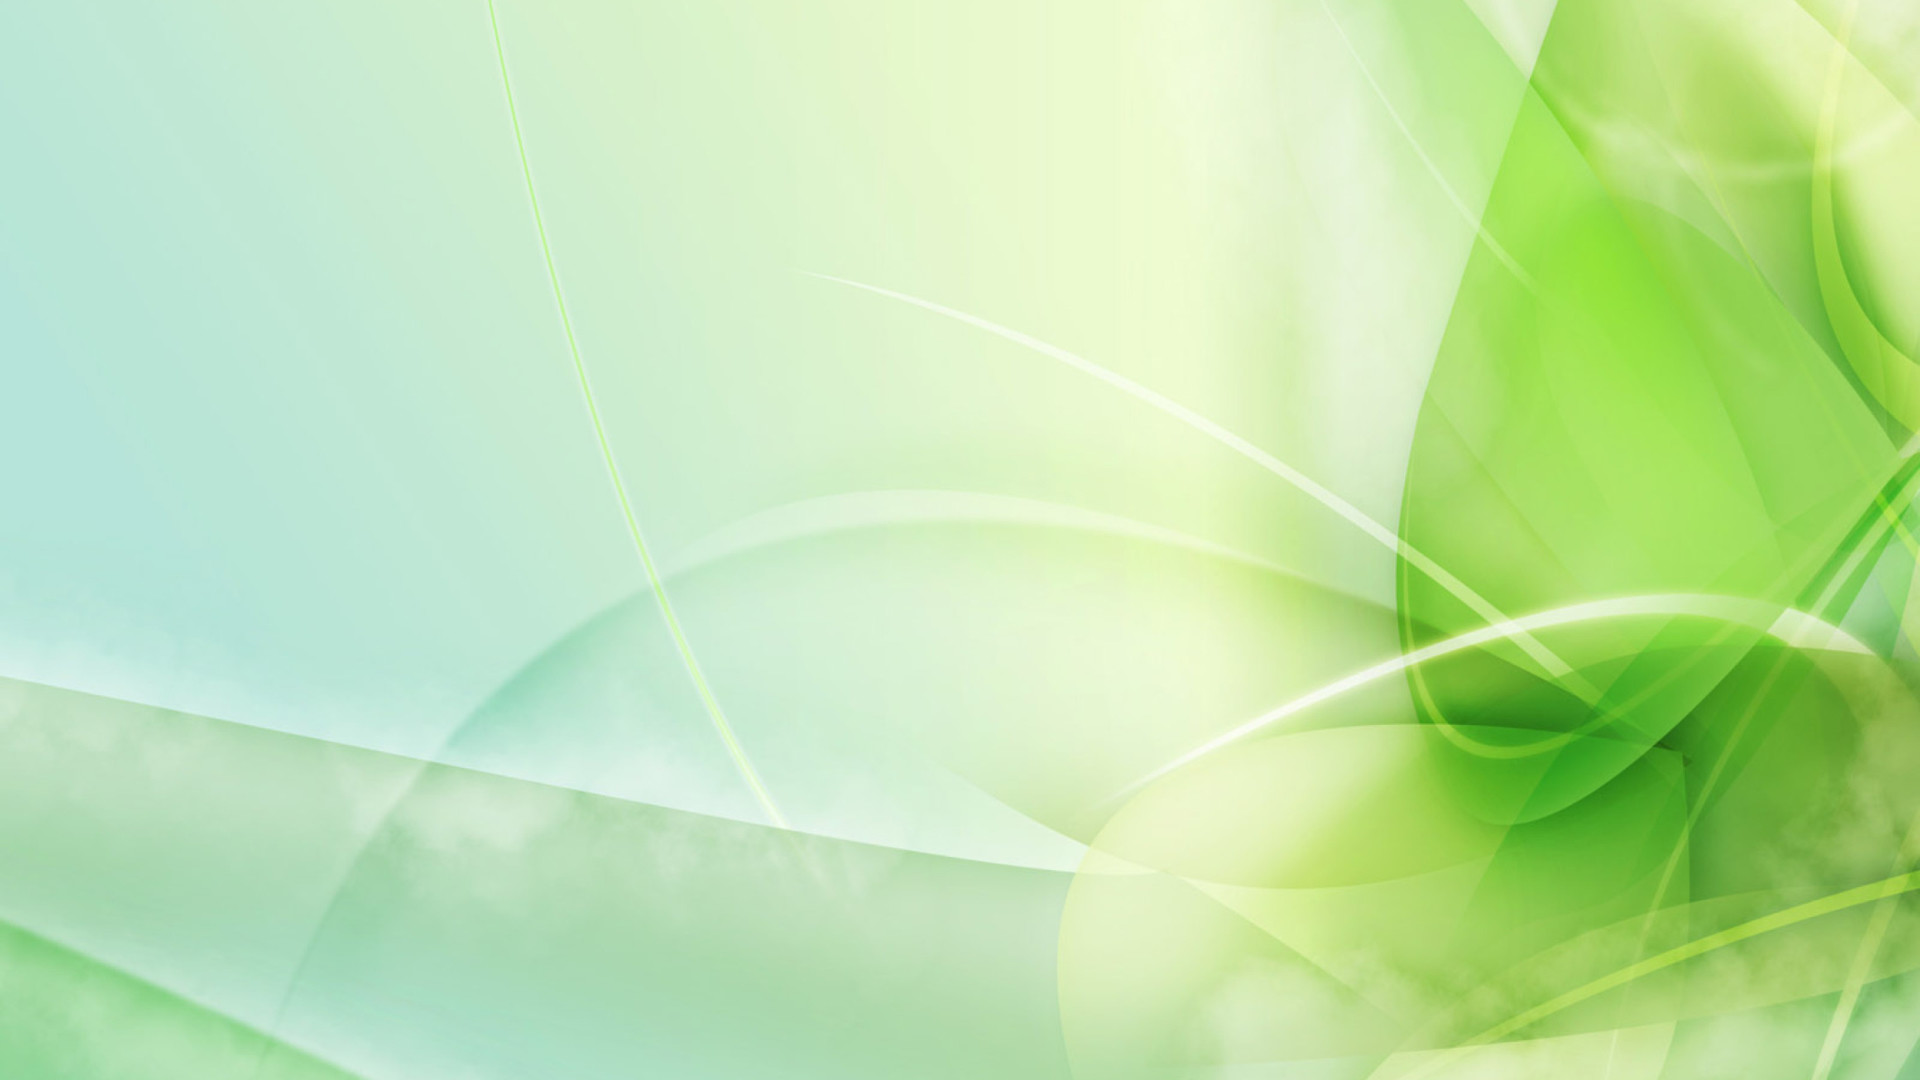 1920x1080 Colorful Background Wallpaper HD - Background Wallpaper Â· greenabstract green  abstract ...